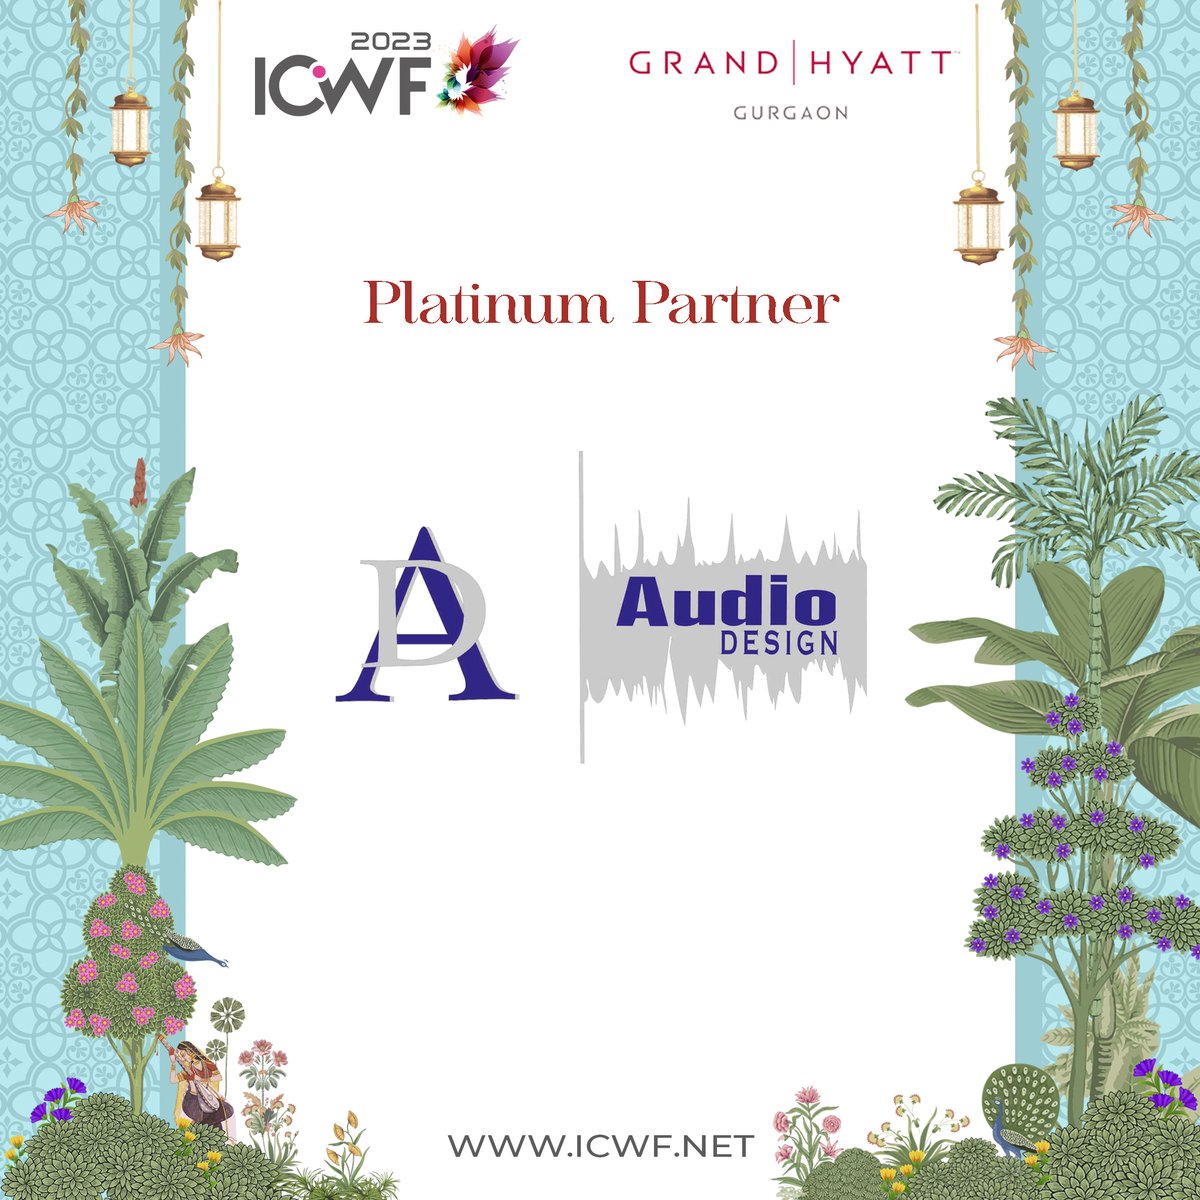 We are thrilled to announce Audio Design as our esteemed platinum partner for the highly anticipated #ICWF2023.
Secure your spot now! 📝✨ Limited rooms are available.

To secure your spot, click the link in our bio.👆
 
#ICWF2023 #AudioDesign #WeddingEvents #WeddingAndEvents